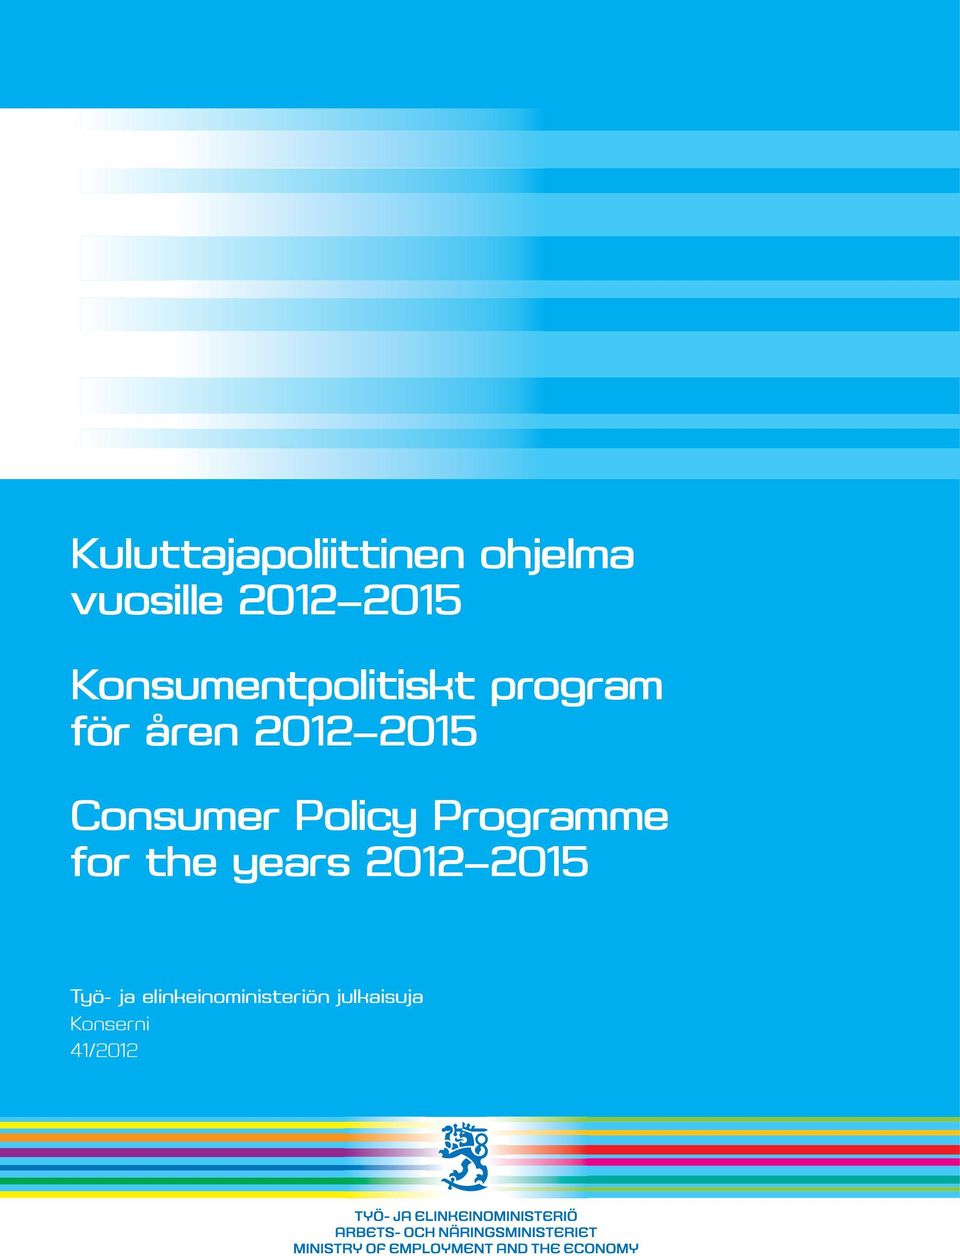 Consumer Policy Programme for the years 2012 2015